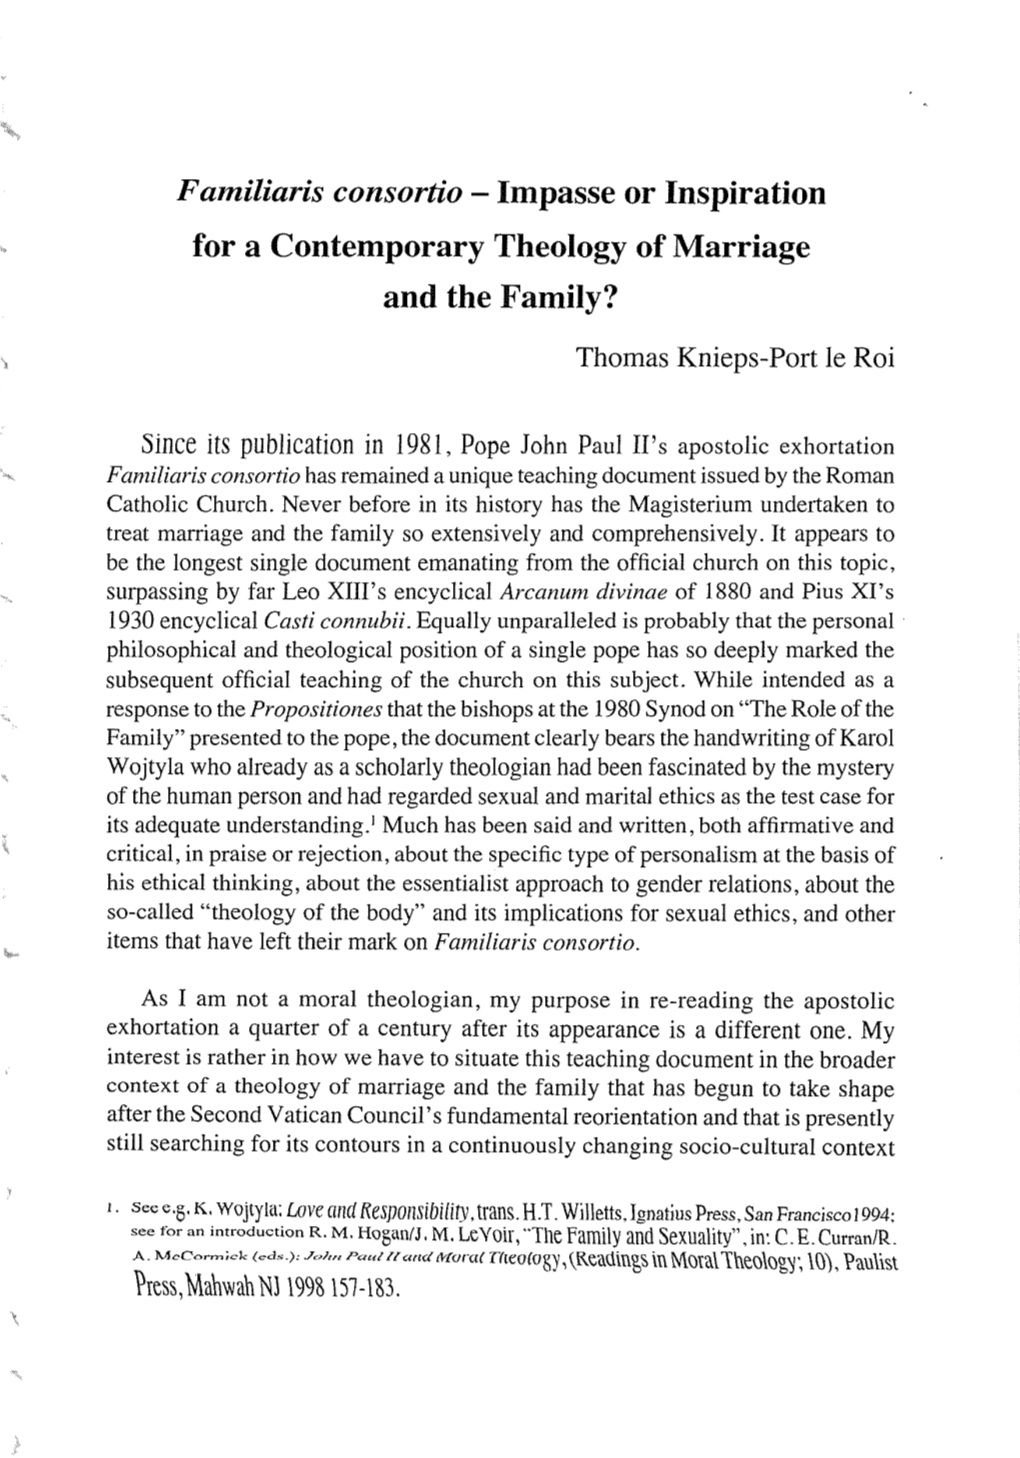 Familiaris Consortio - Impasse Or Inspiration for a Contemporary Theology of Marriage and the Family?